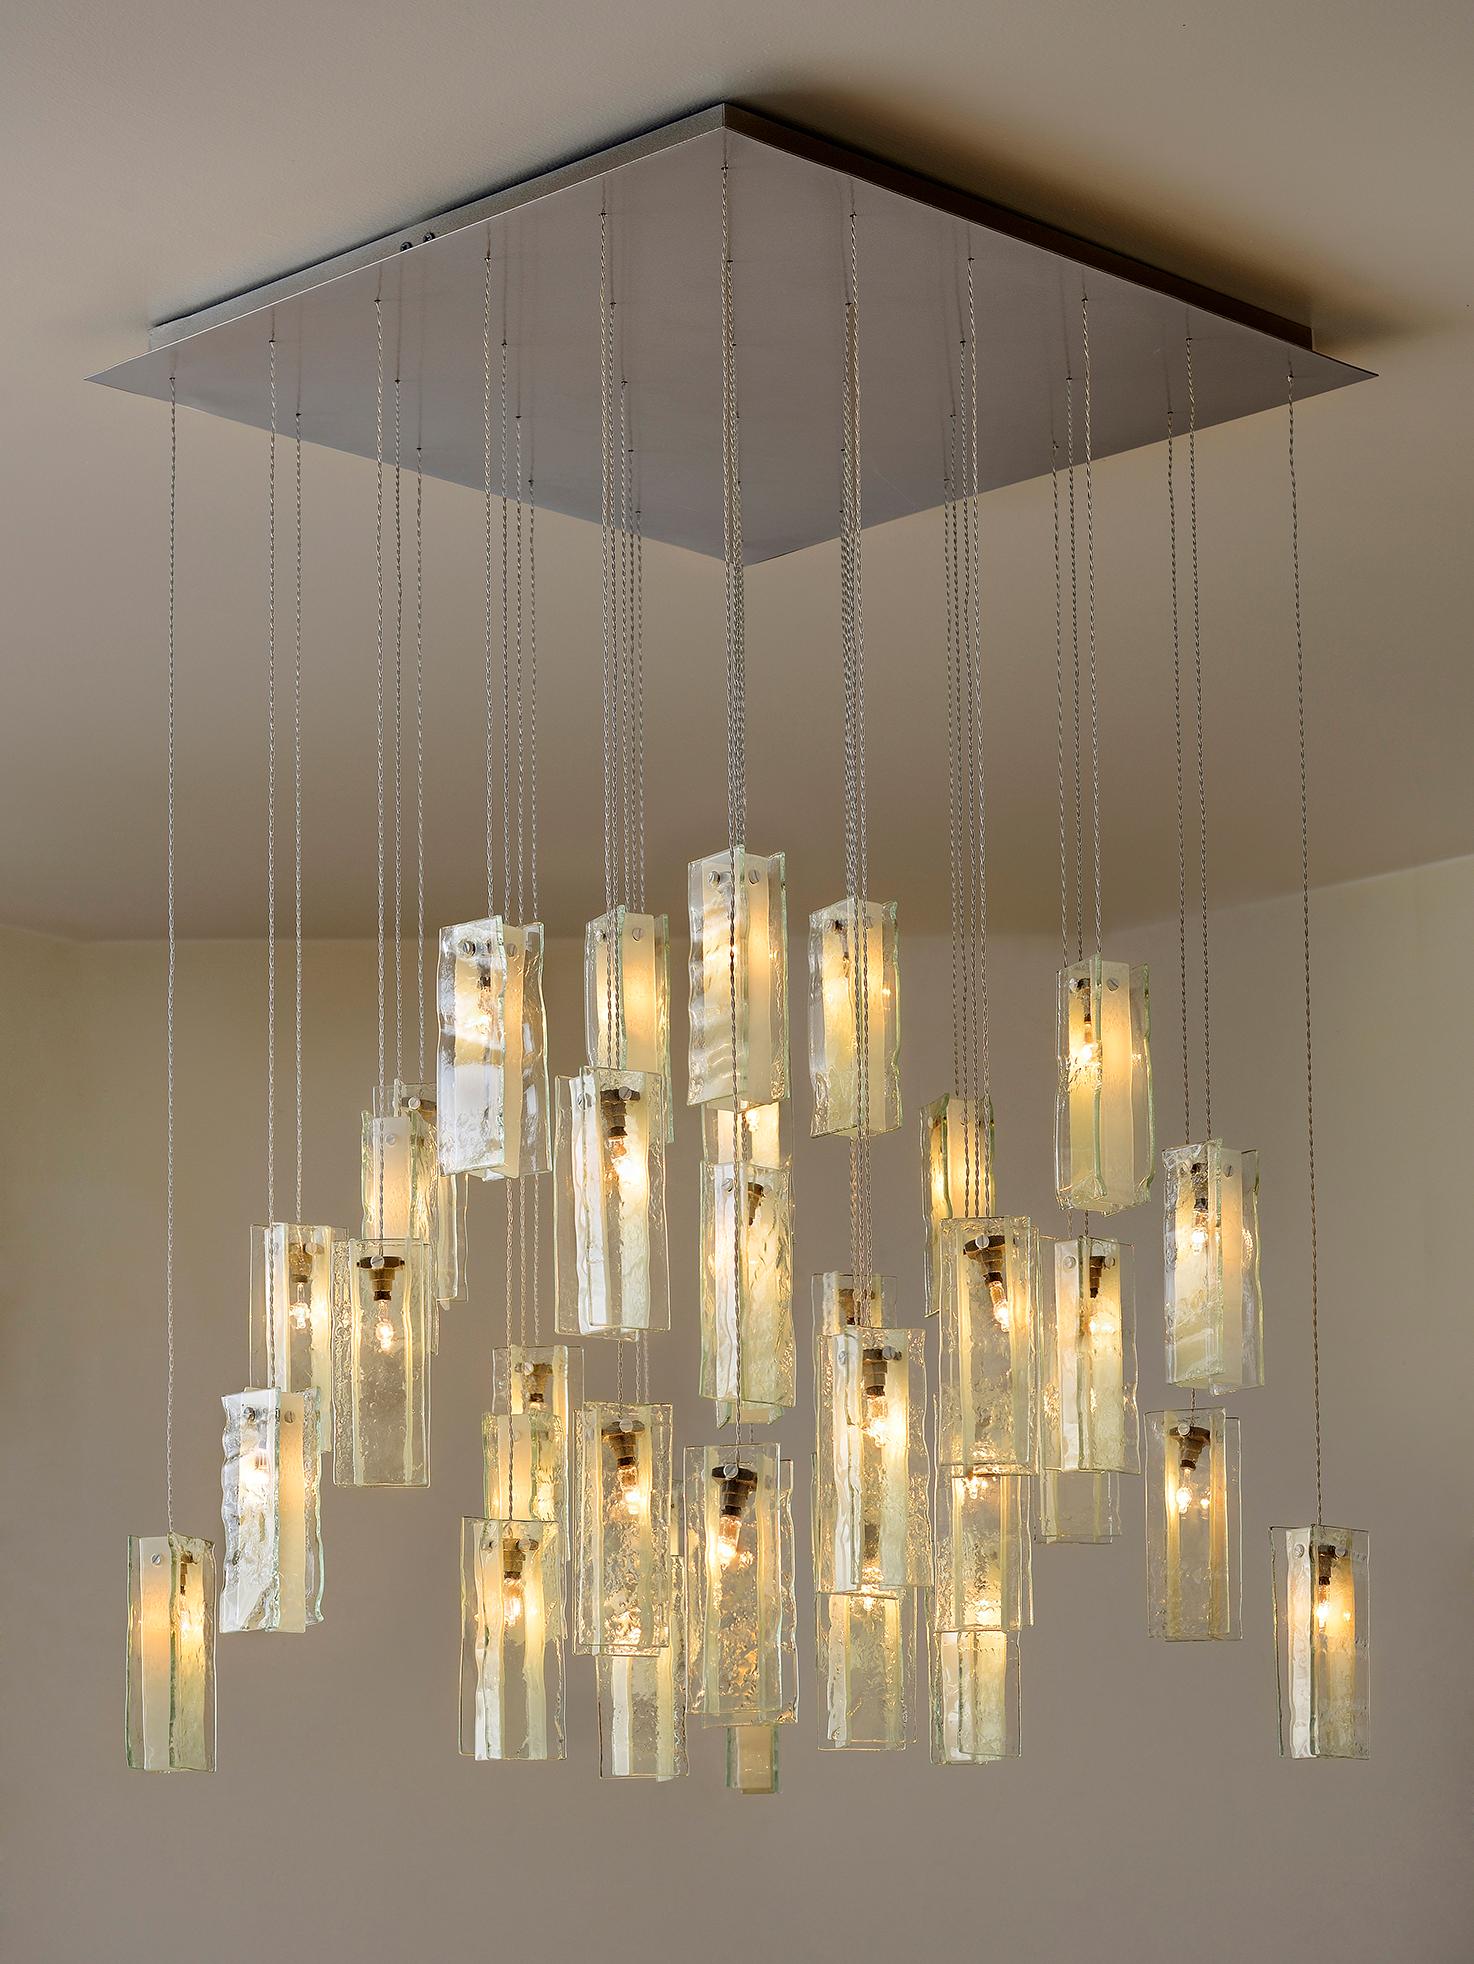 Transform your space with our unique multi-color drops chandelier. This chandelier can be used in all different settings such as a dining room, stairwell illumination, or kitchen pendant lights. Its inherent simplicity adds a versatile and playful